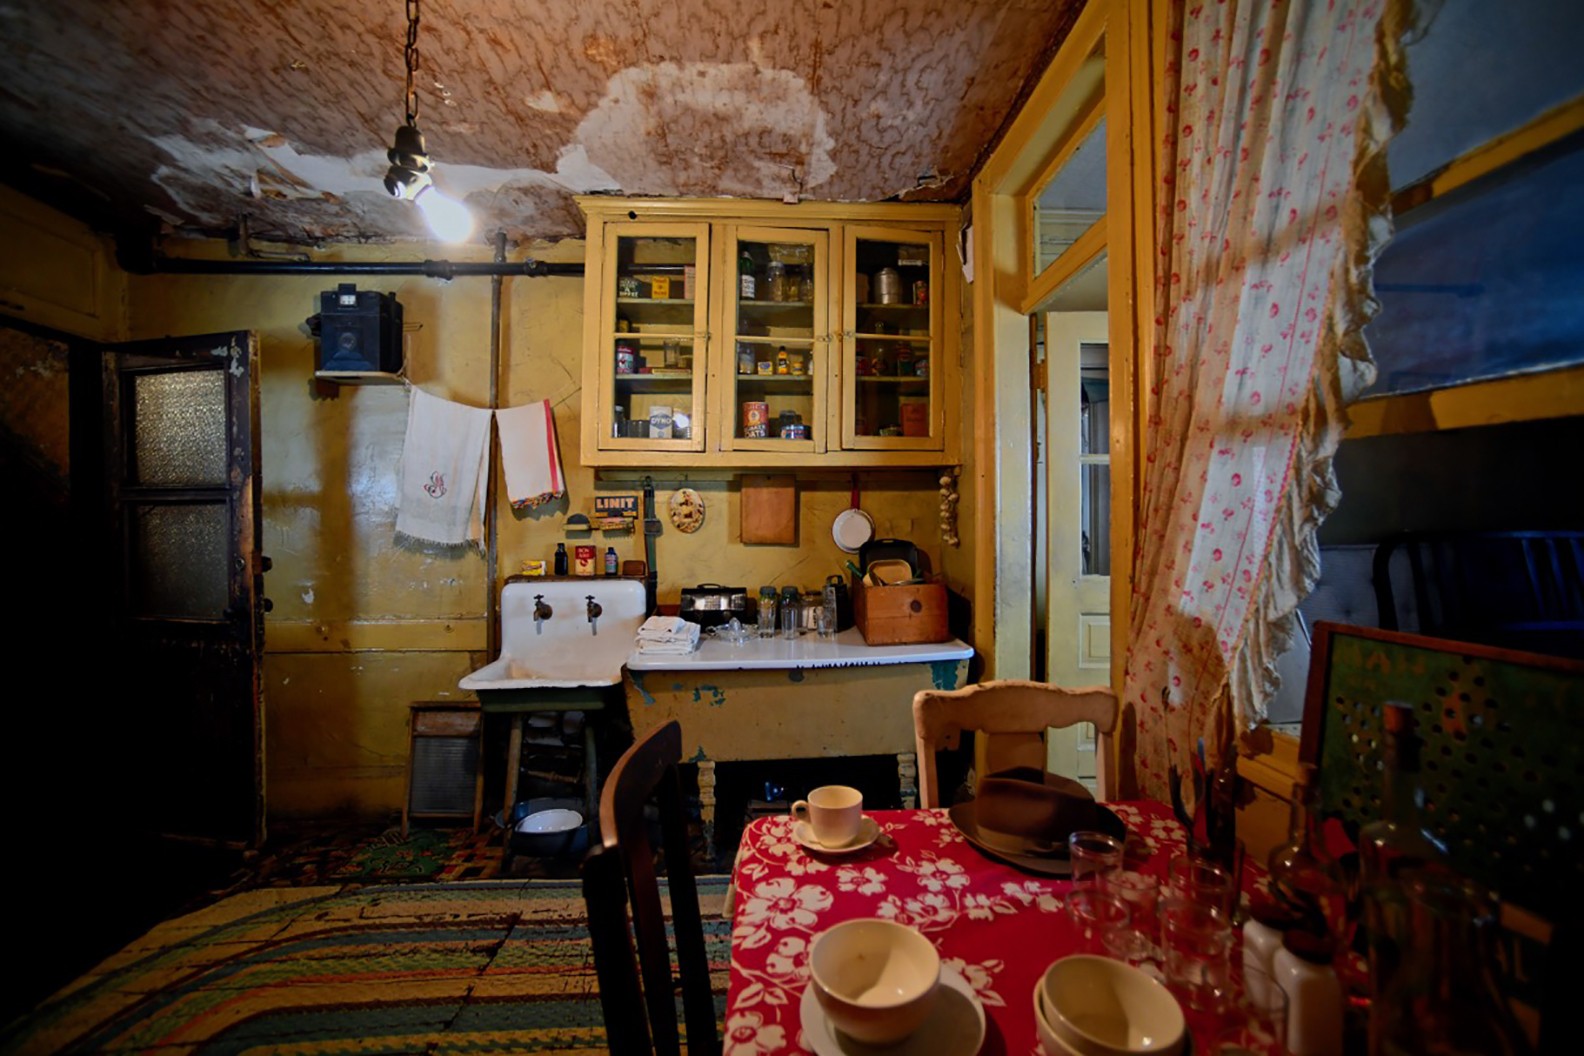 View of the Baldizzi's kitchen showing a table with a red tablecloth and four chairs and a counter, sink, and cabinets on the far wall